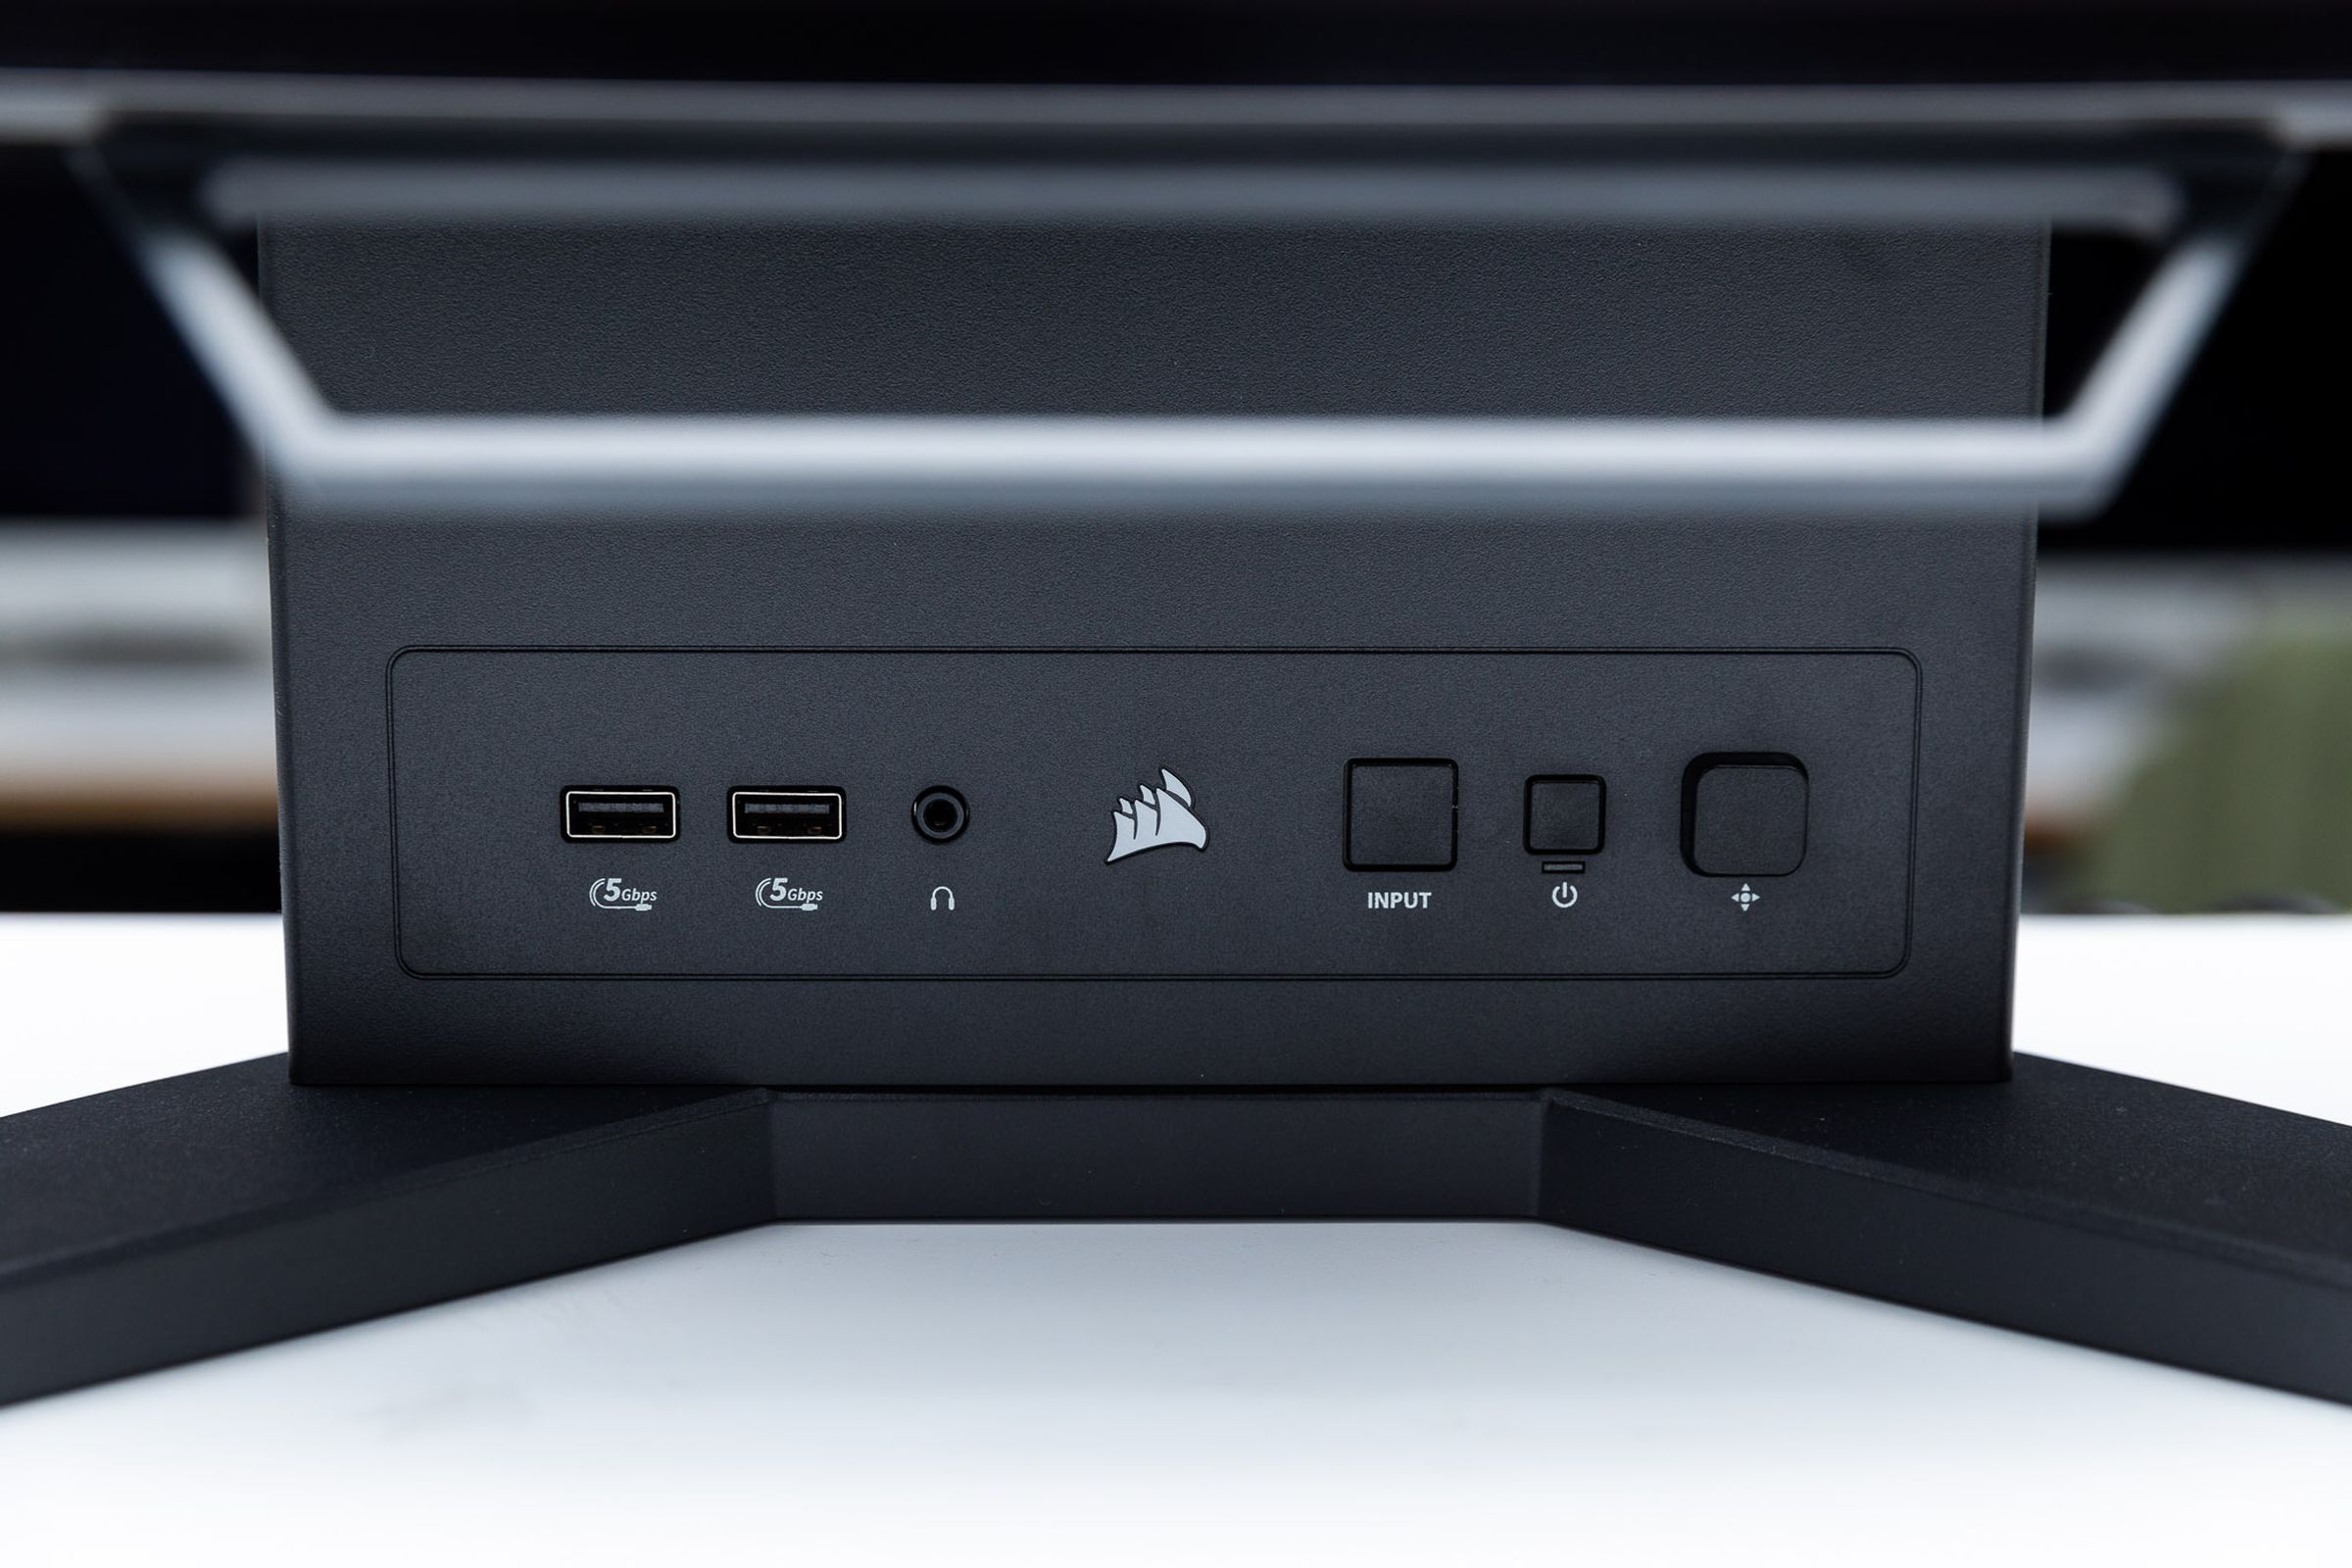 The front panel of buttons and ports on the Corsair Xeneon Flex OLED gaming monitor.